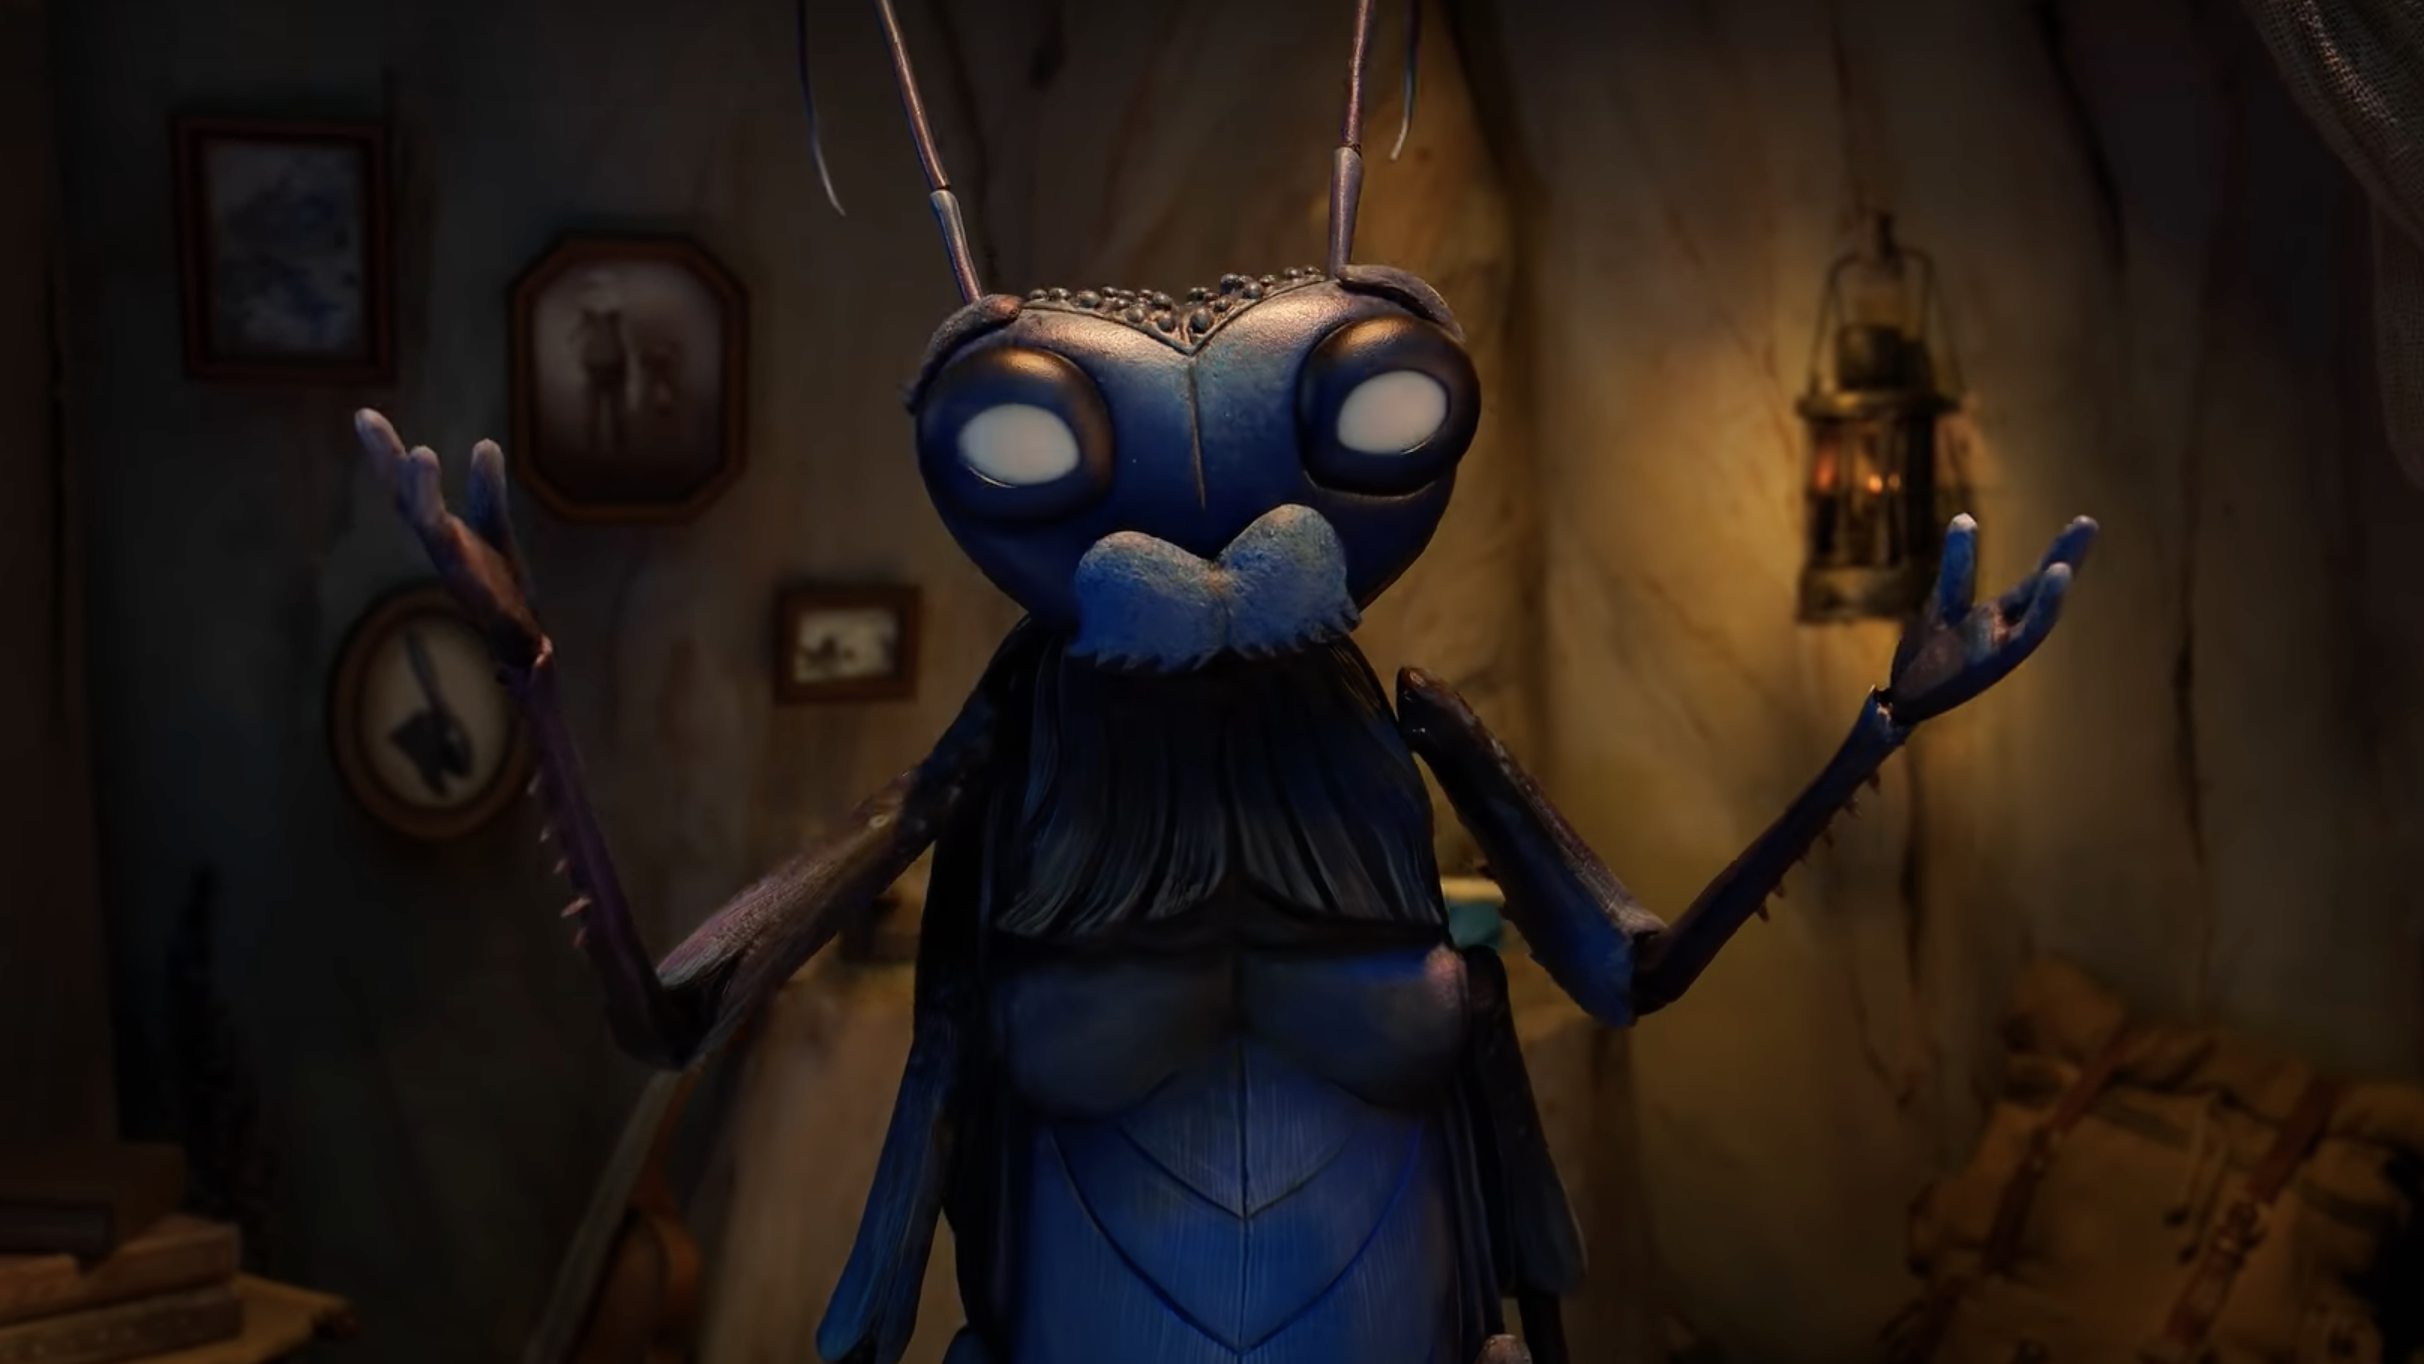 Ewan McGregor is a cricket with a story to share in first teaser for Guillermo del Toro’s Pinocchio